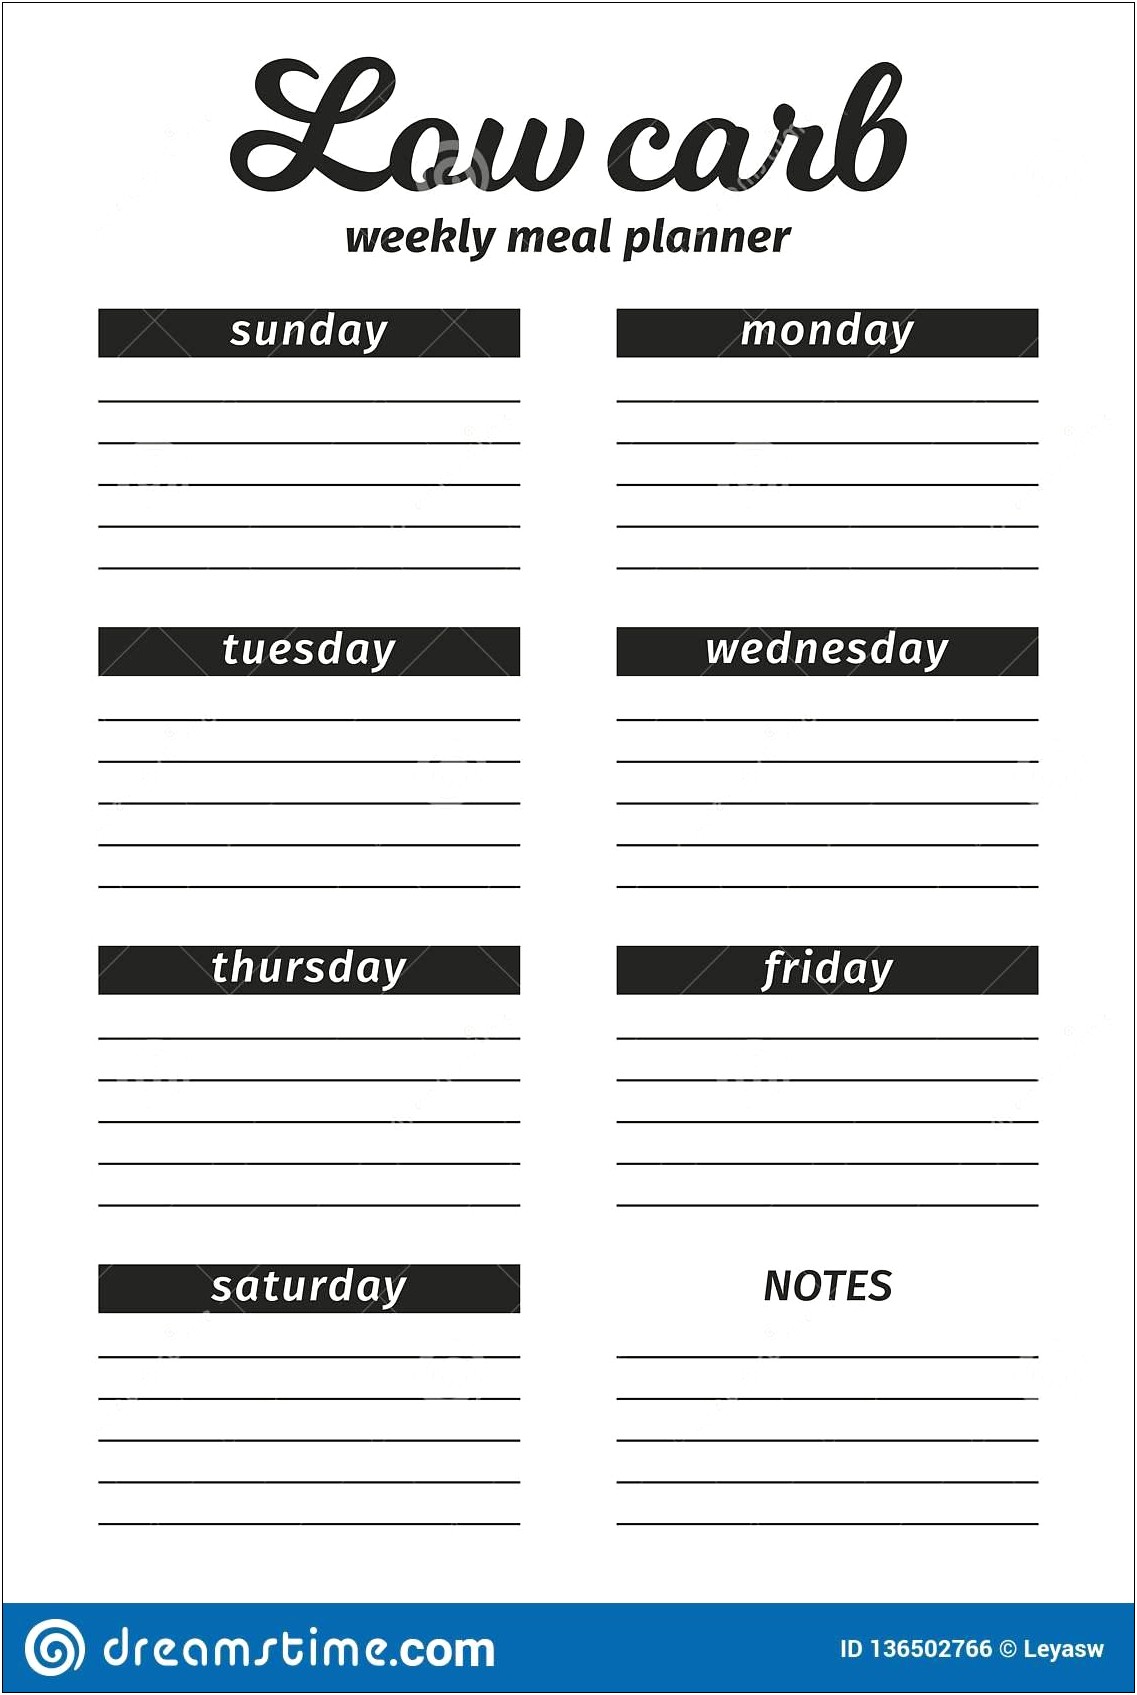 Free Meal Planner Template With Snacks